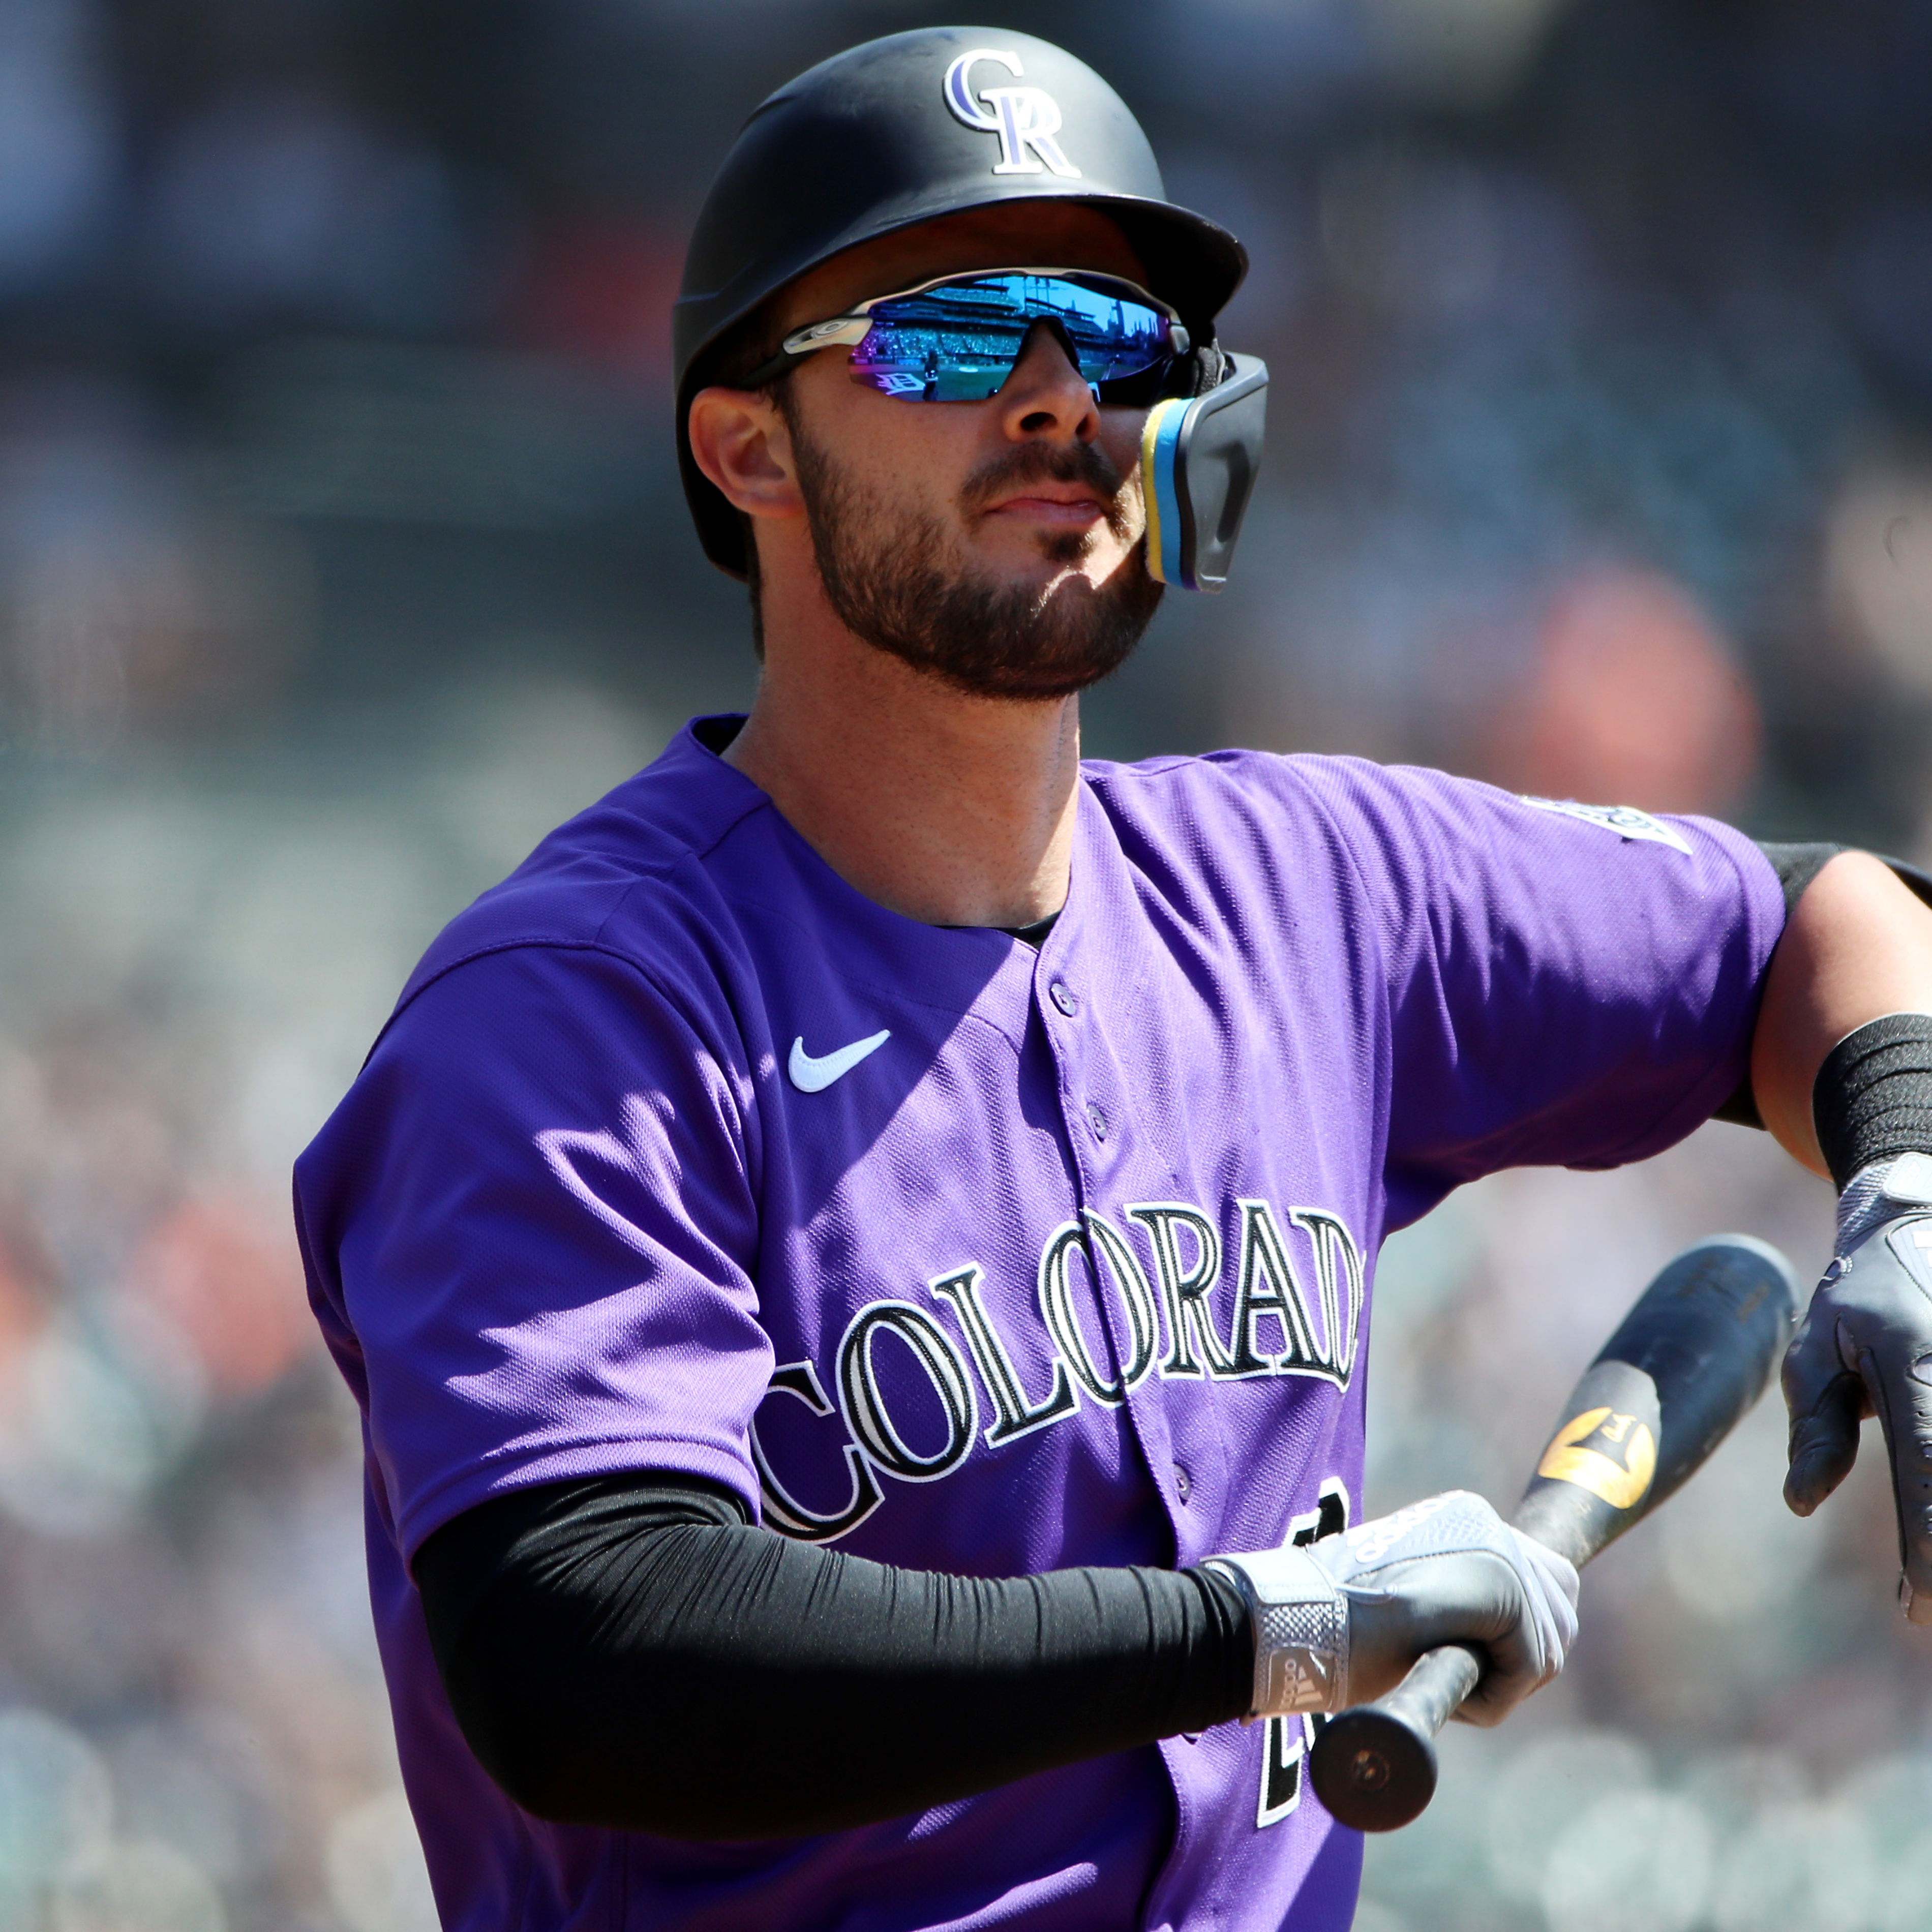 Rockies’ Kris Bryant Placed on 10-Day IL with Left Foot Injury